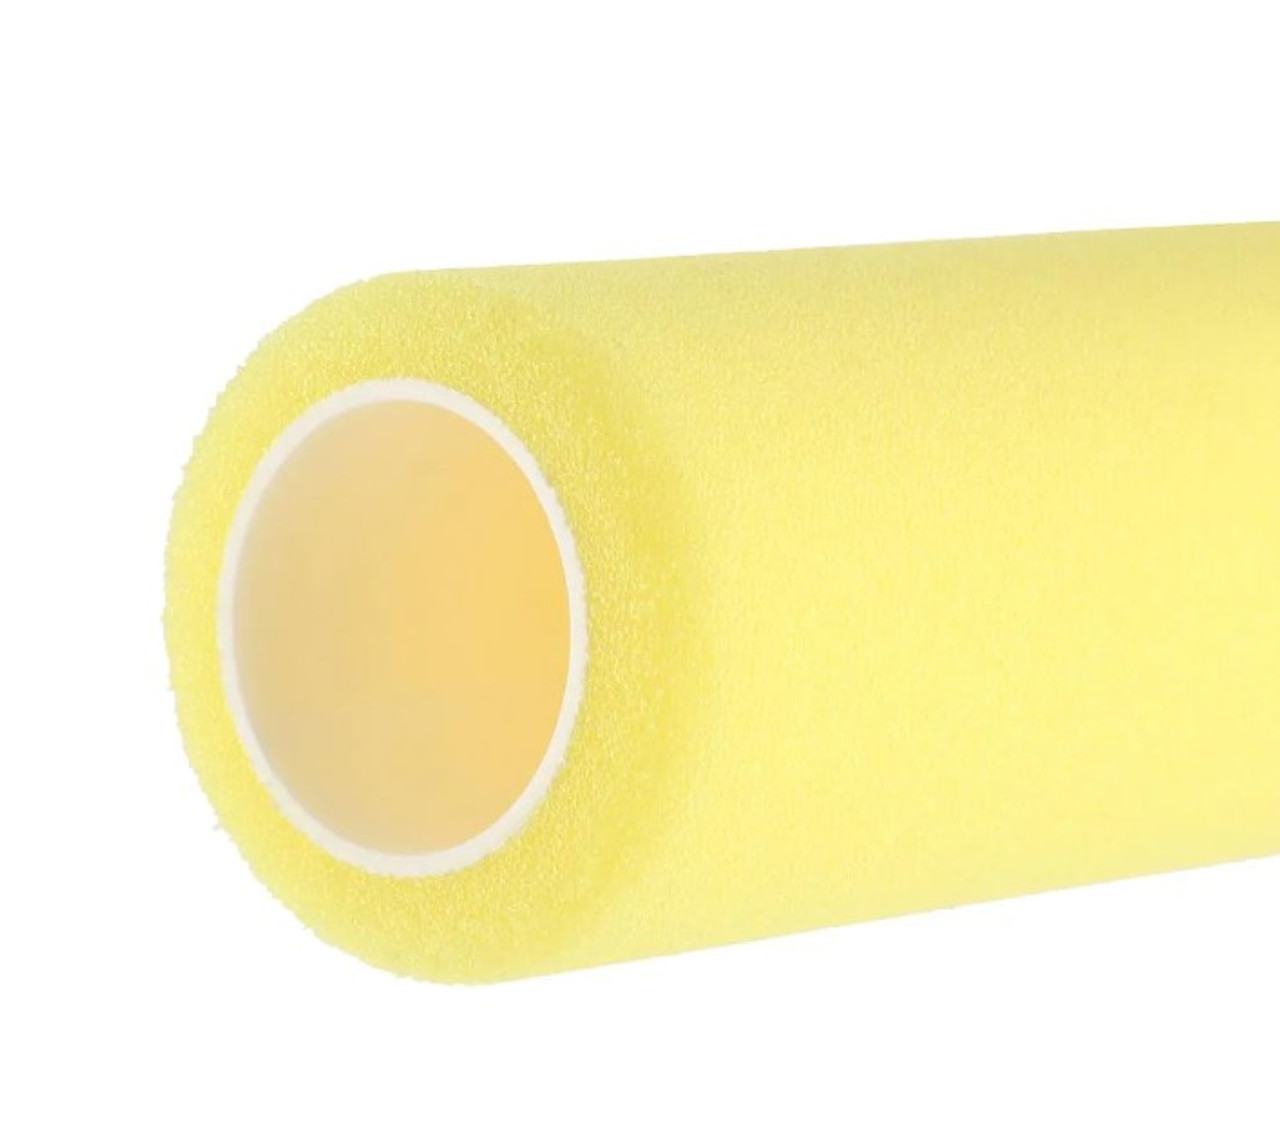 Foam Pro Roller 9 with 3/8 Nap